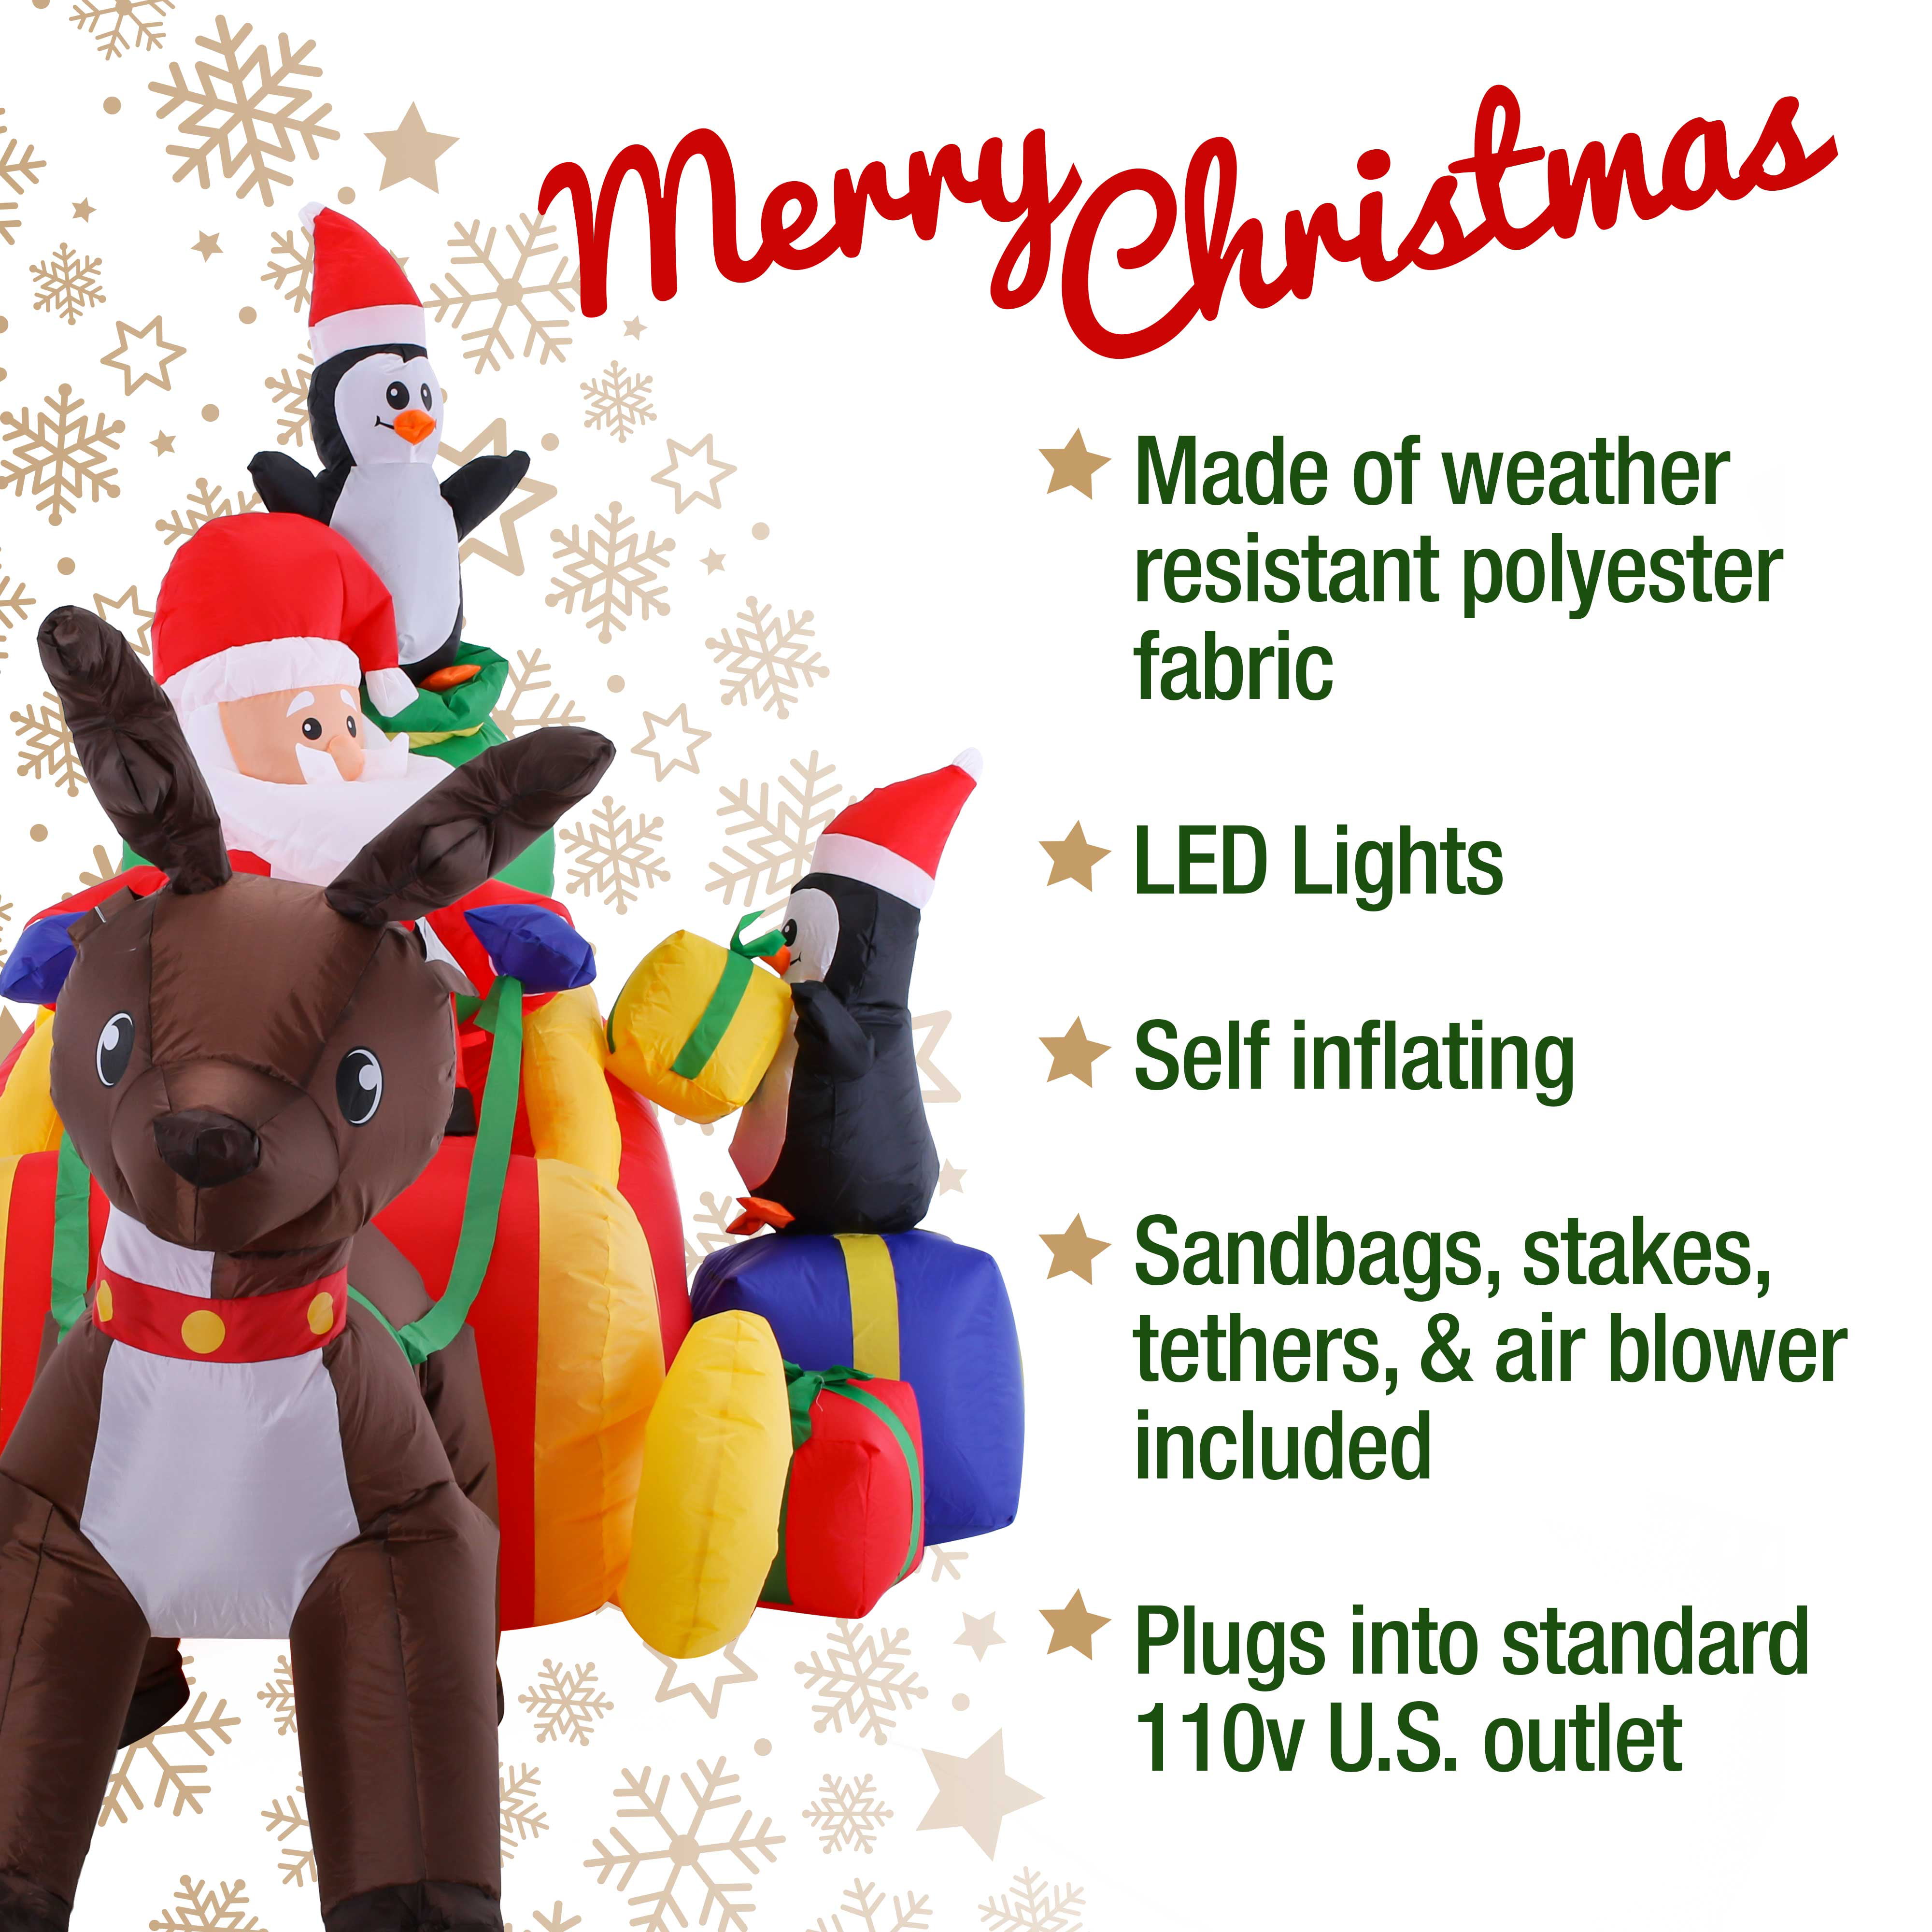 Penguins Christmas Masters 7 Foot Long Inflatable Santa Claus On Sleigh with Reindeer Gift Bag and Presents Indoor Outdoor Yard Lawn Decoration with LED Lights Cute Fun Xmas Holiday Party Blow Up